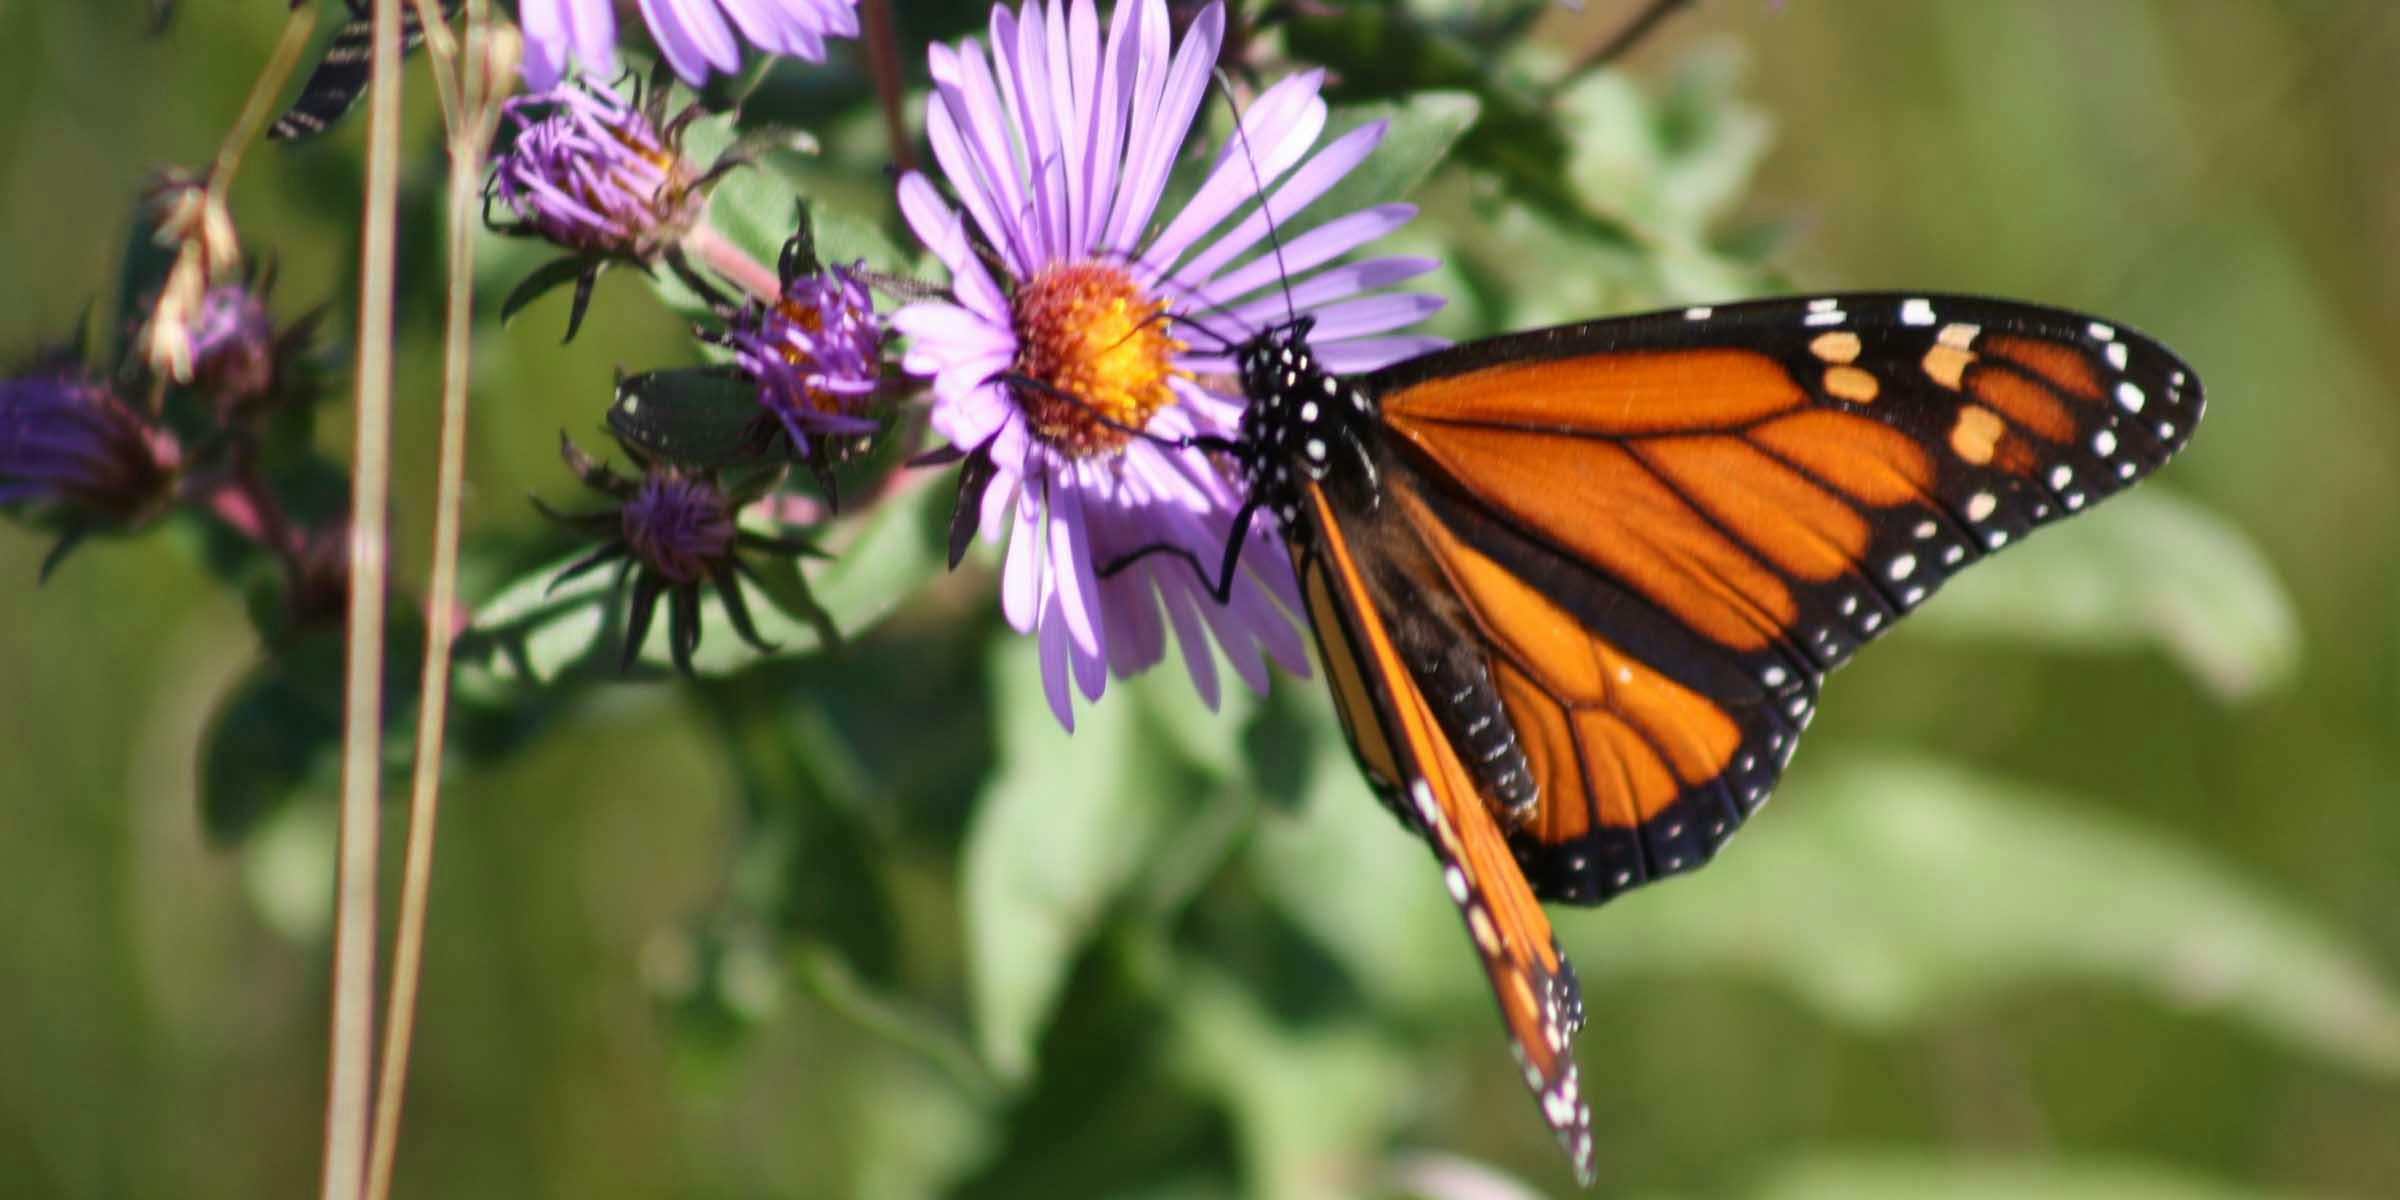 A bright orange and black butterfly on a purple flower with yellow center